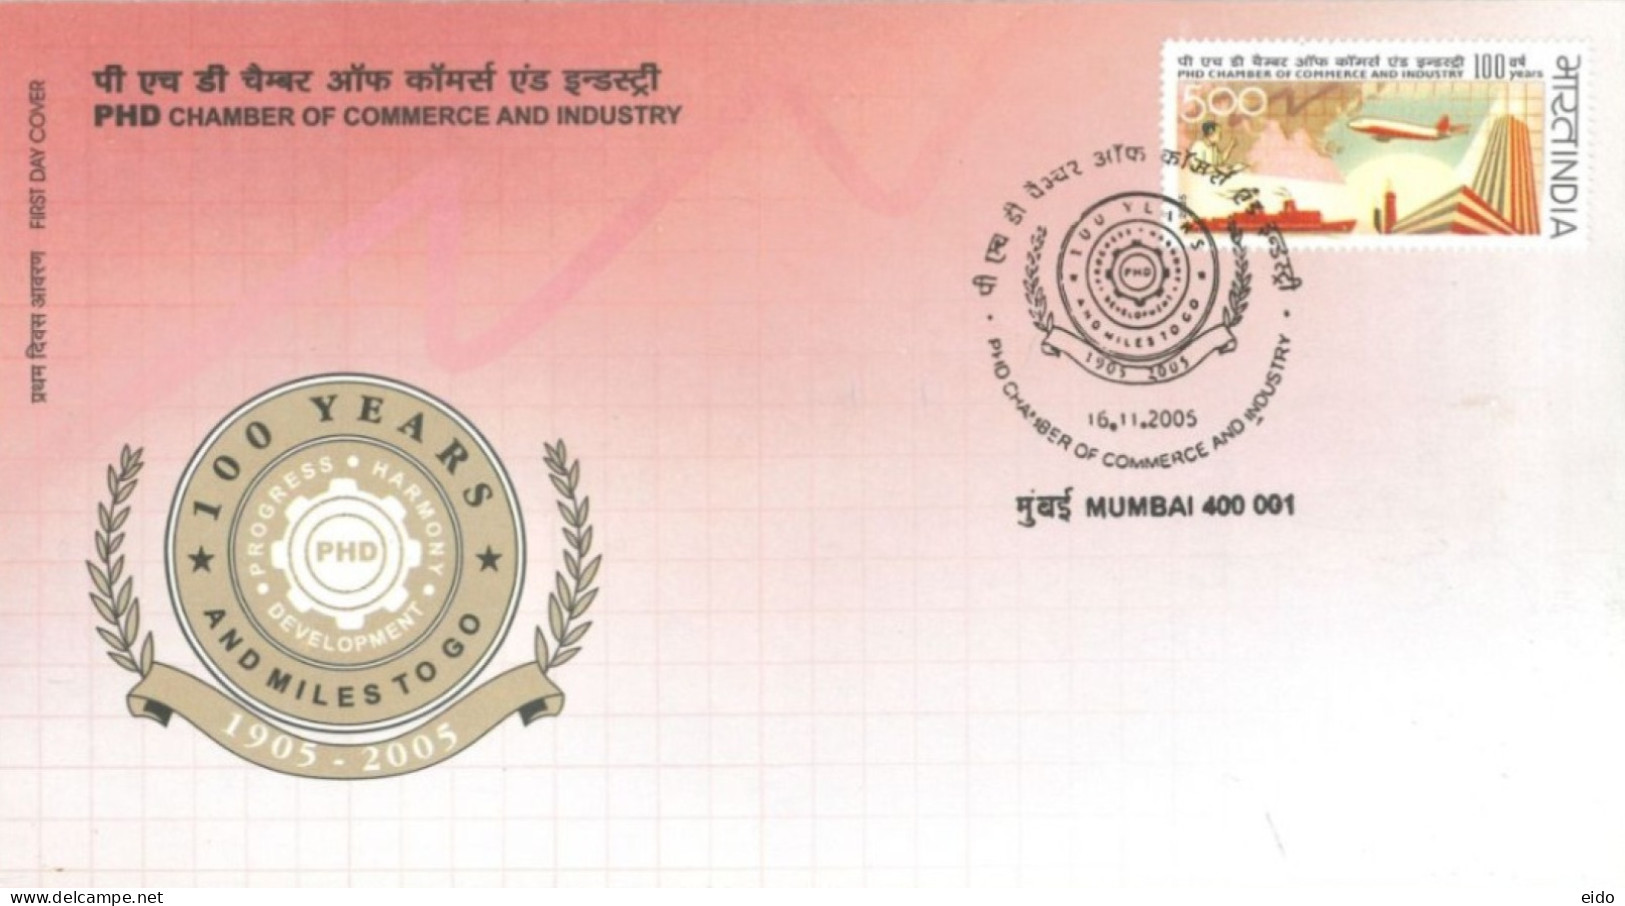 INDIA - 2005 - FDC STAMP OF PHD CHAMBER OF COMMERCE AND INDUSTRY. - Storia Postale